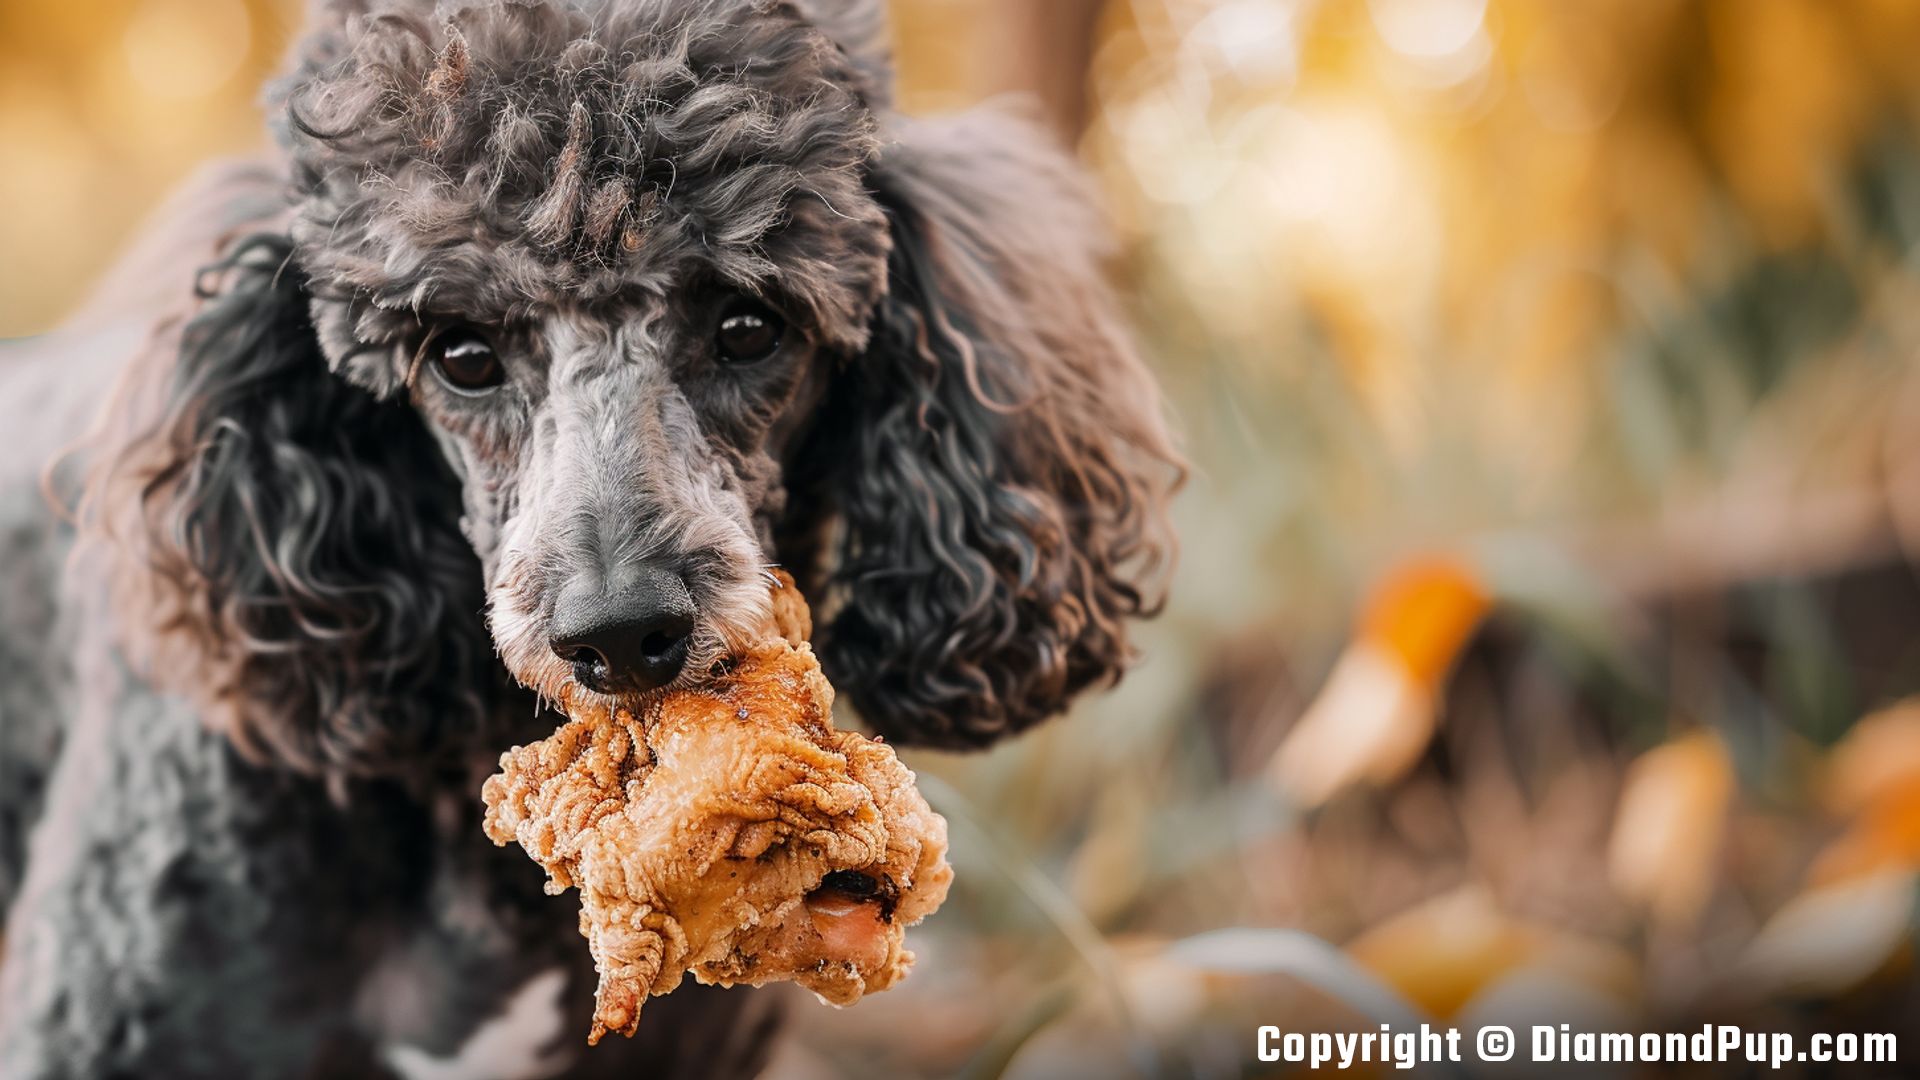 Image of an Adorable Poodle Snacking on Chicken